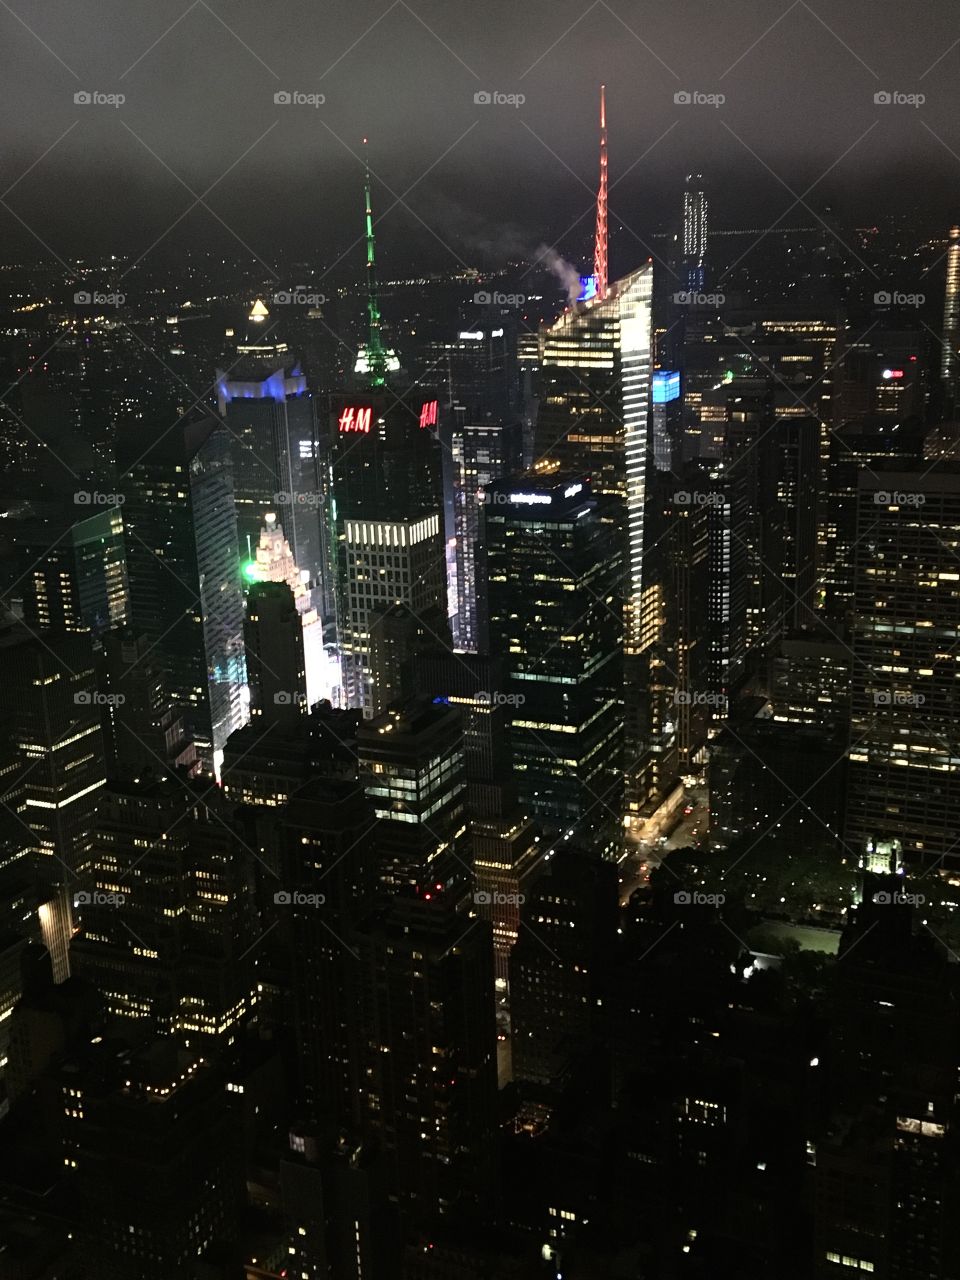 The lively, bustling city of New York on a summer night. View from the Empire State Building Observatory Deck. Flashing Times Square seen in the distance. 